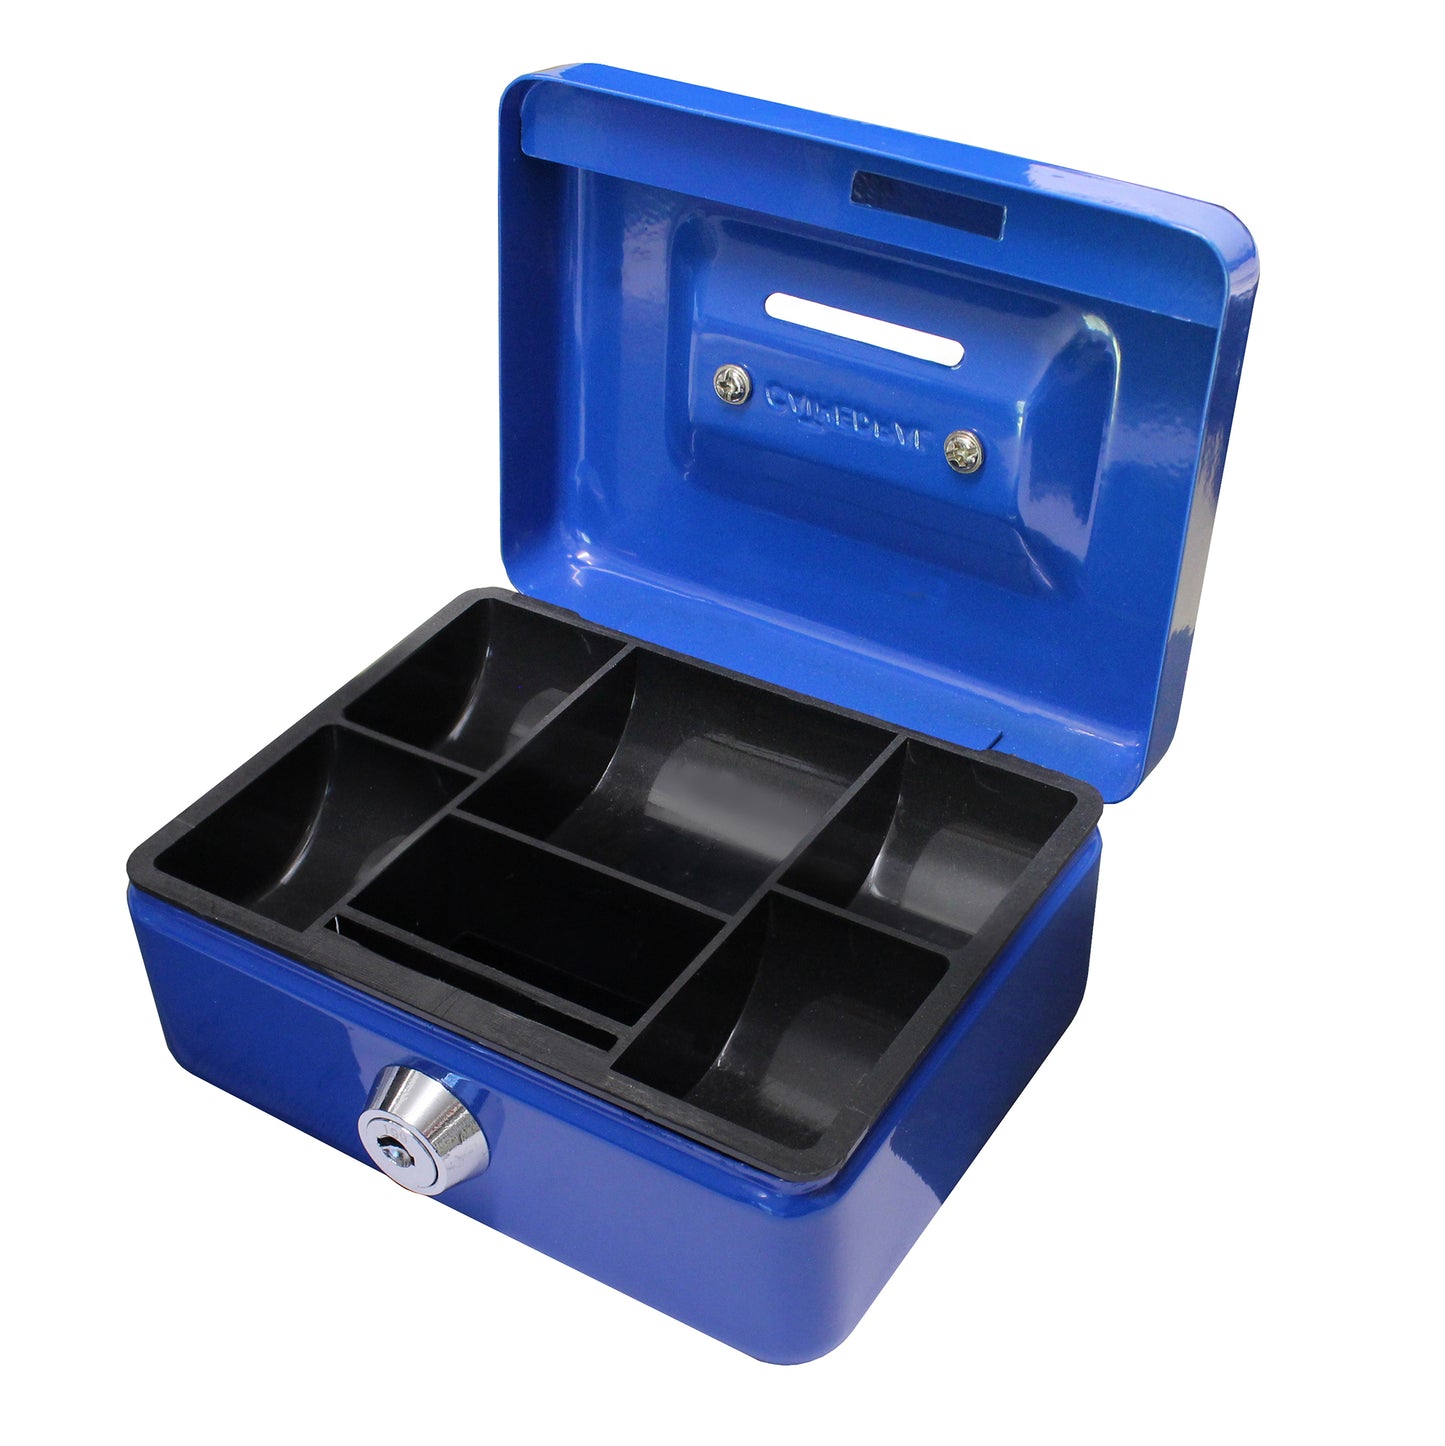 Key Lockable Cash Box with Coin Slot & Lift Out 5 Compartment Coin Tray - 4 Inch